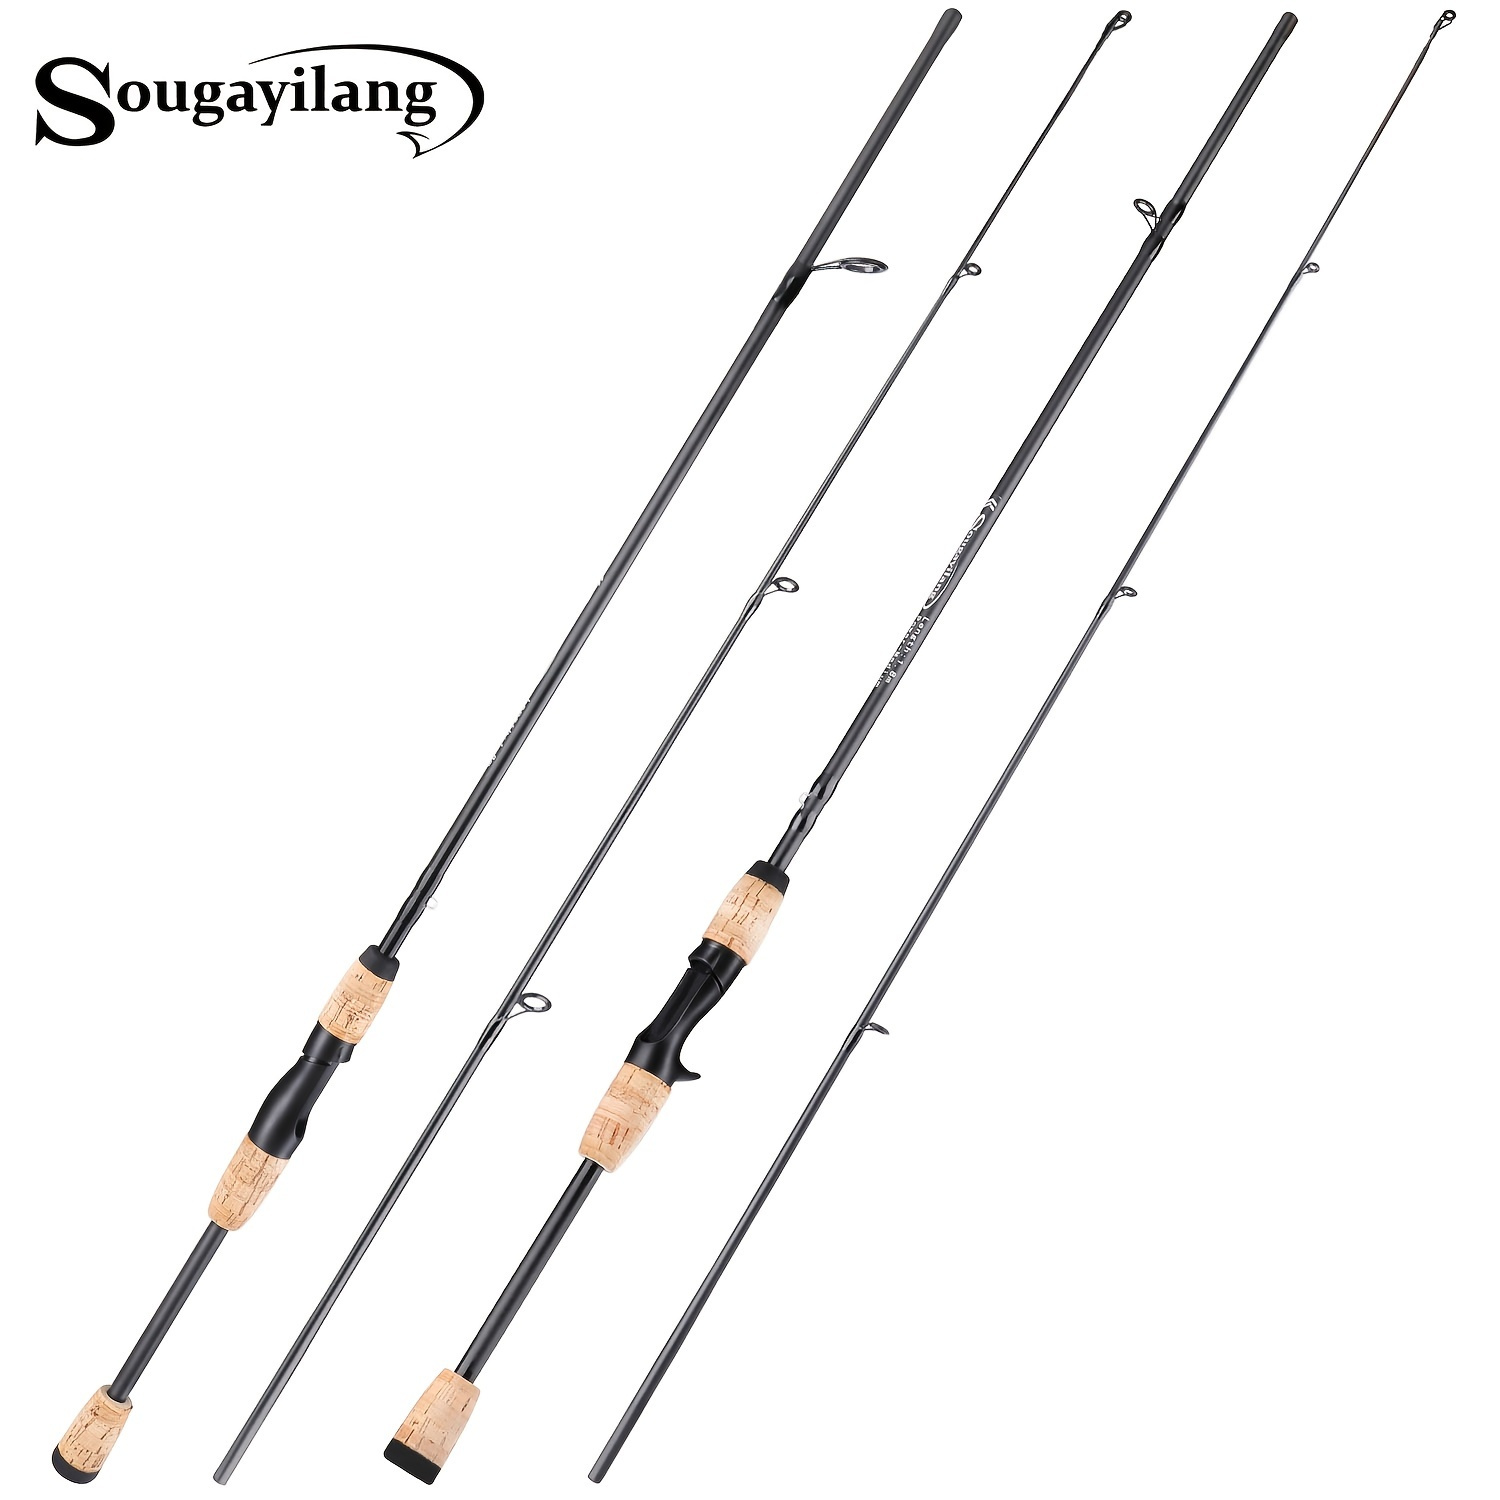 

Sougayilang Portable 2-section Spinning/casting Fishing Rod - Lightweight, Durable, And Versatile